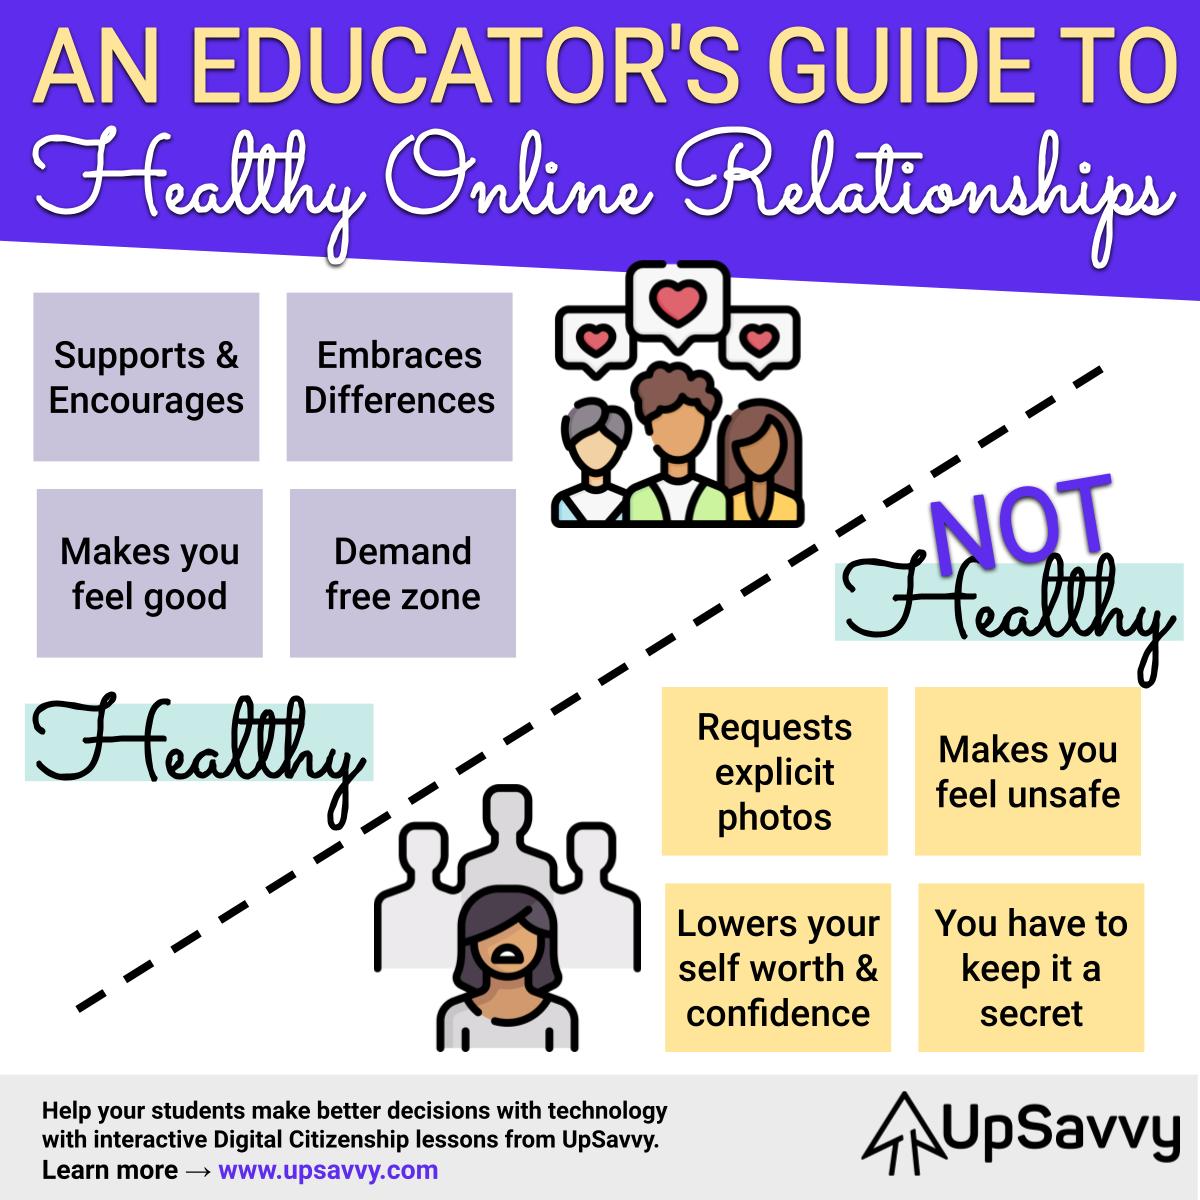 An Educator’s Guide to Healthy Online Relationships